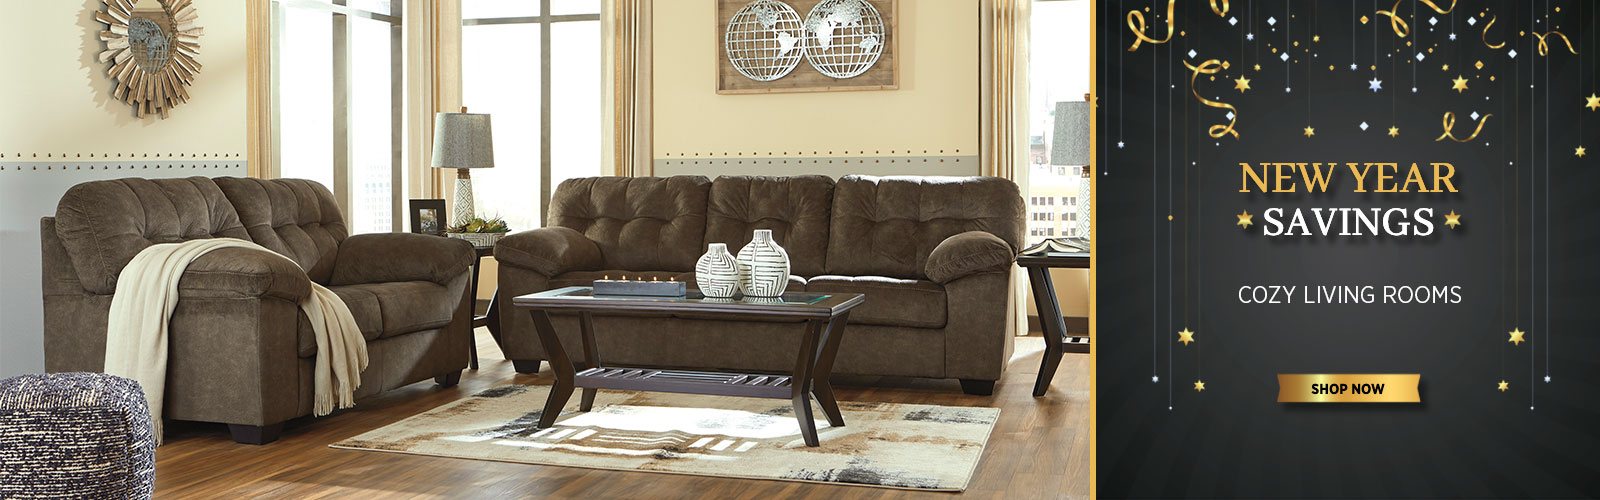 New Year's Savings - Cozy Living Rooms - Shop Now